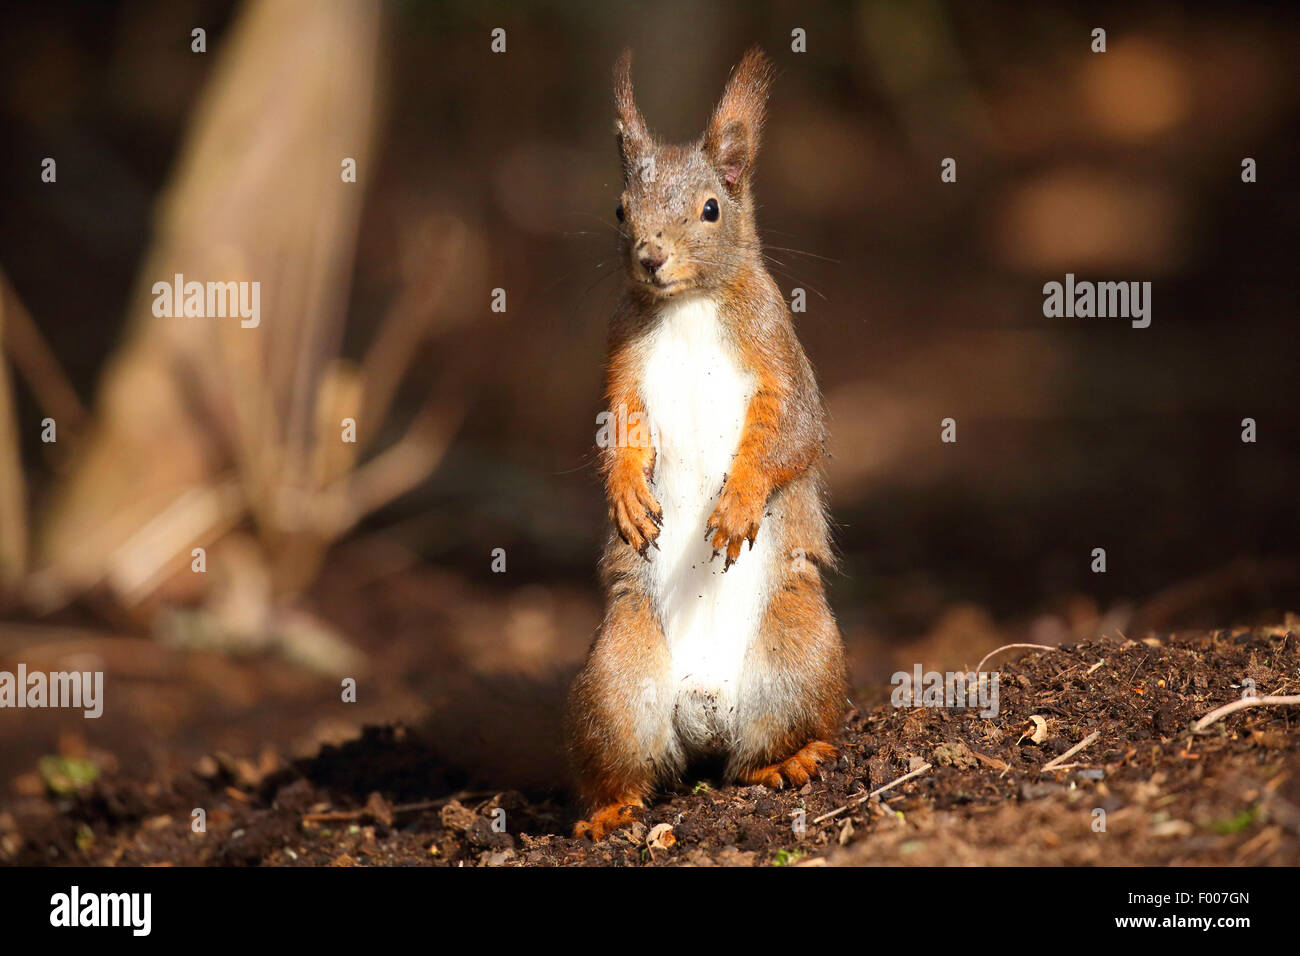 European red squirrel, Eurasian red squirrel (Sciurus vulgaris), sitting up on the hind legs on the ground, Germany Stock Photo